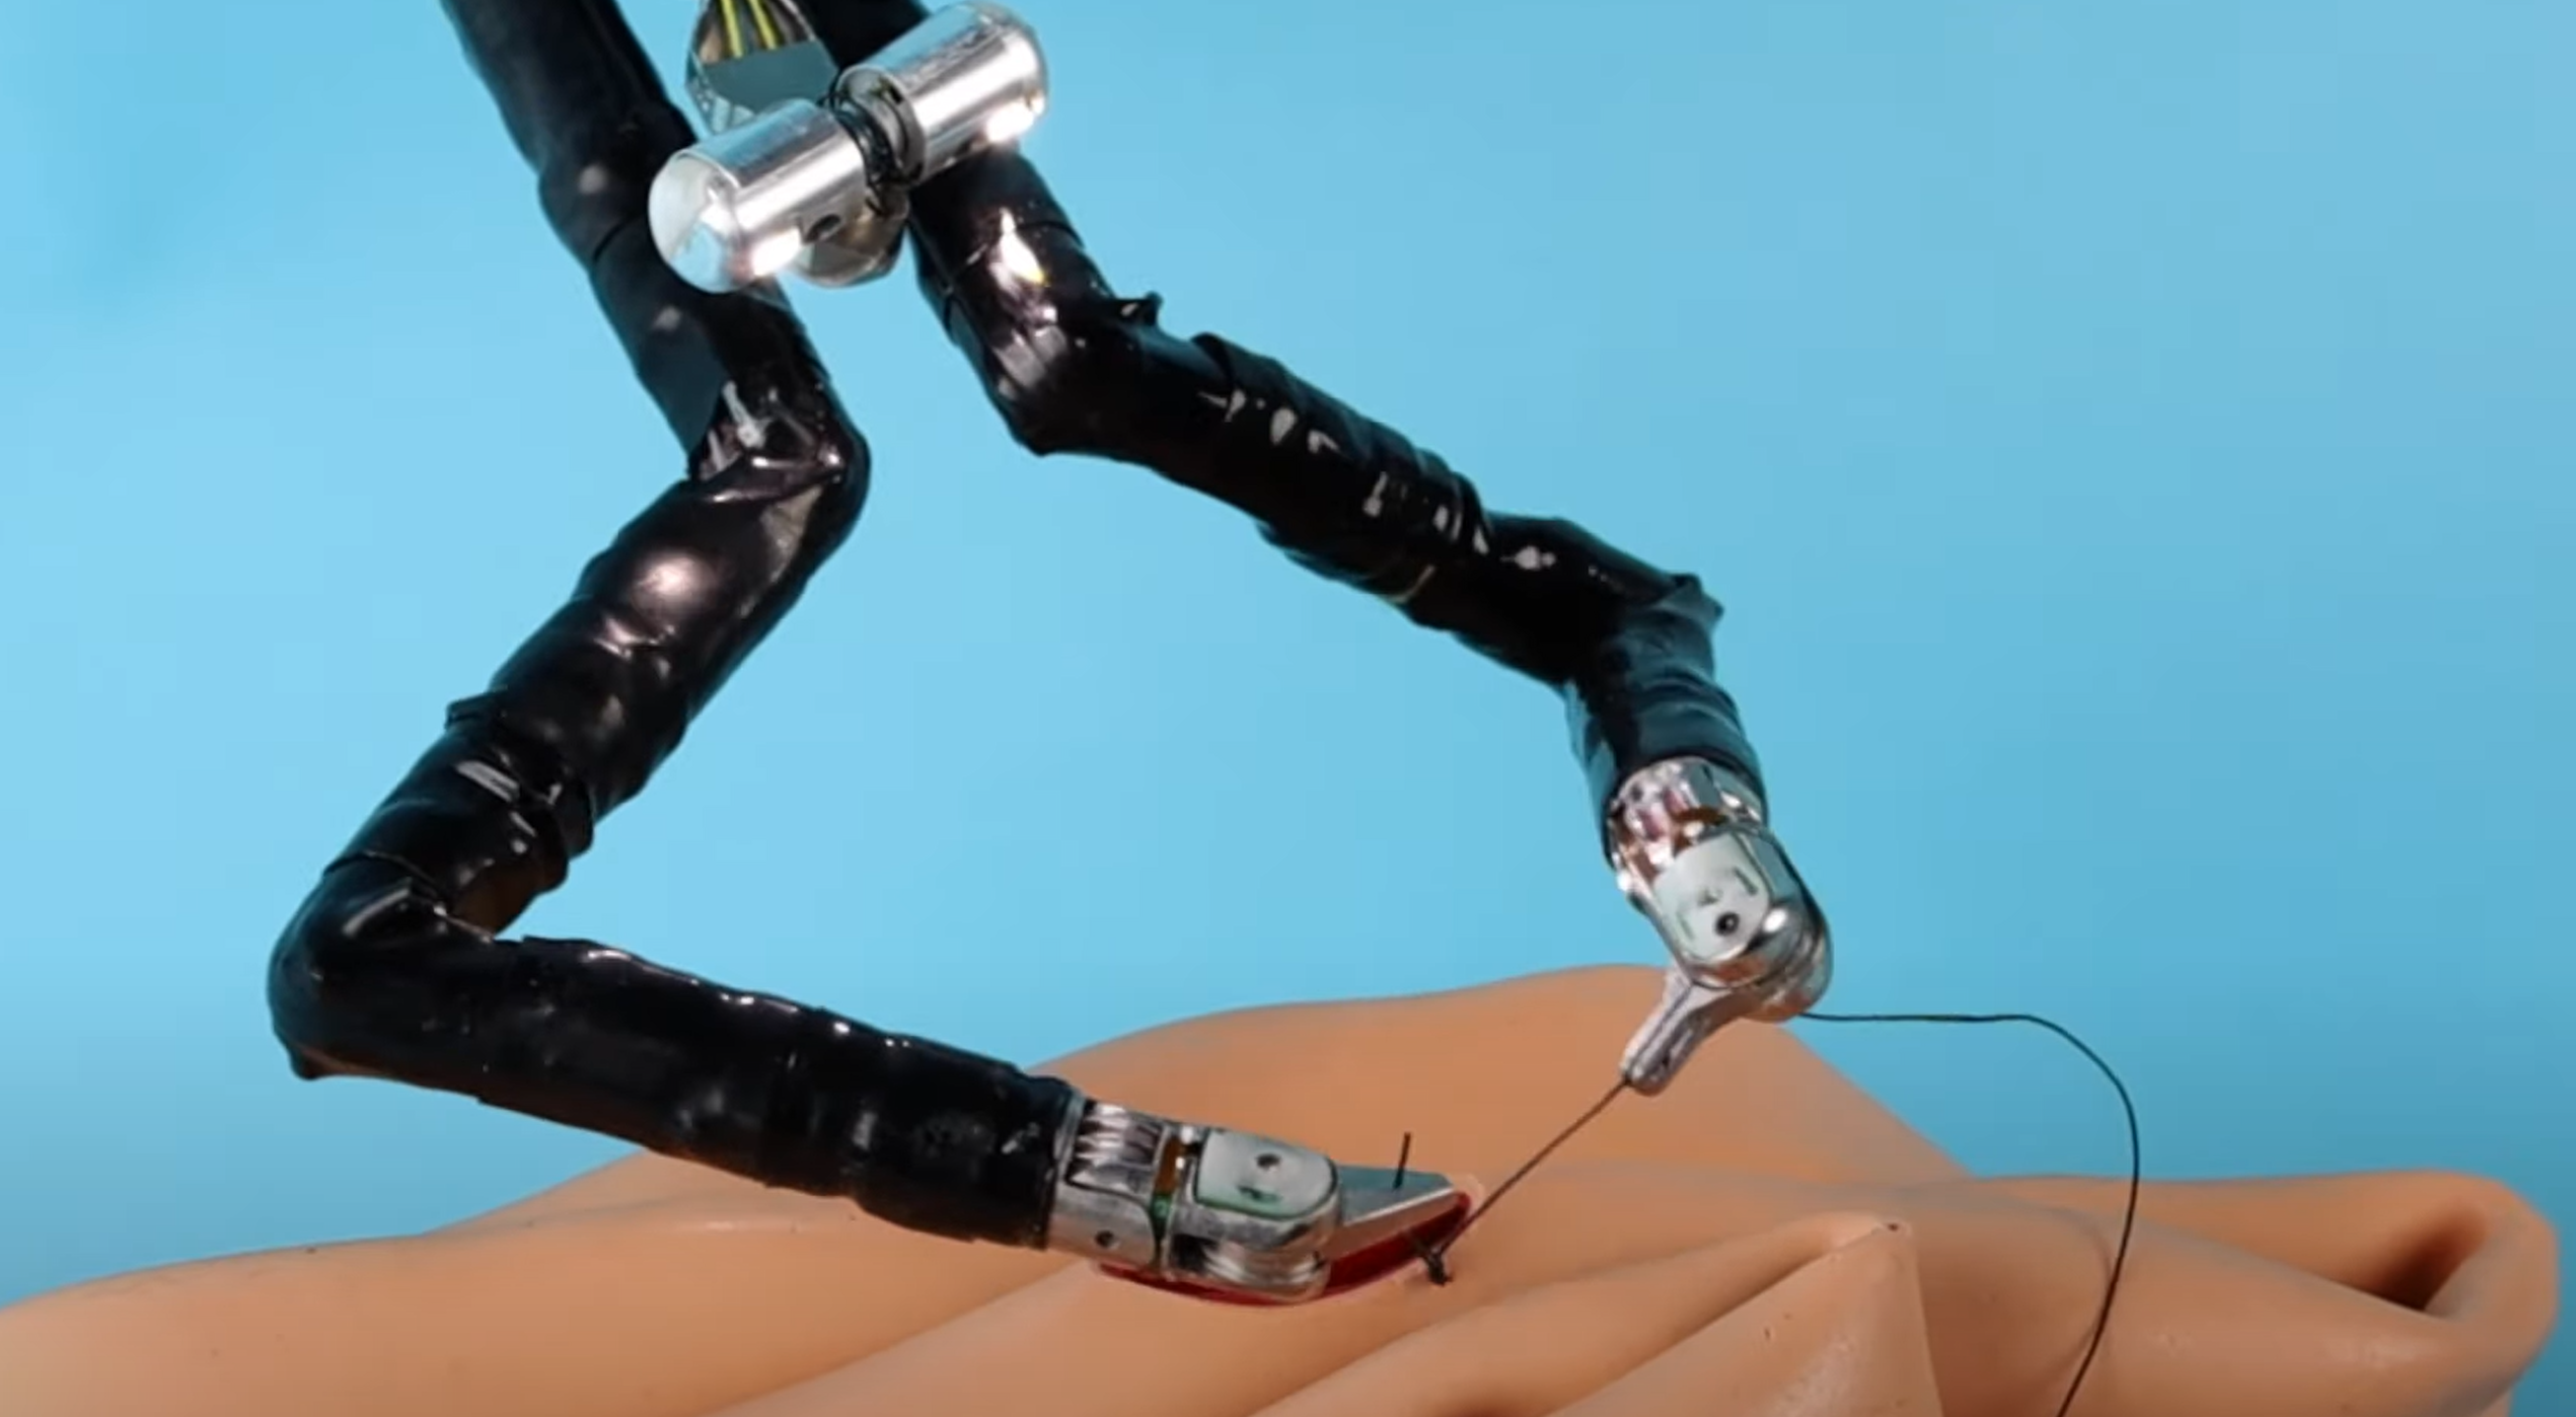 Surgical Robot that can Suture and safe time post-surgery!